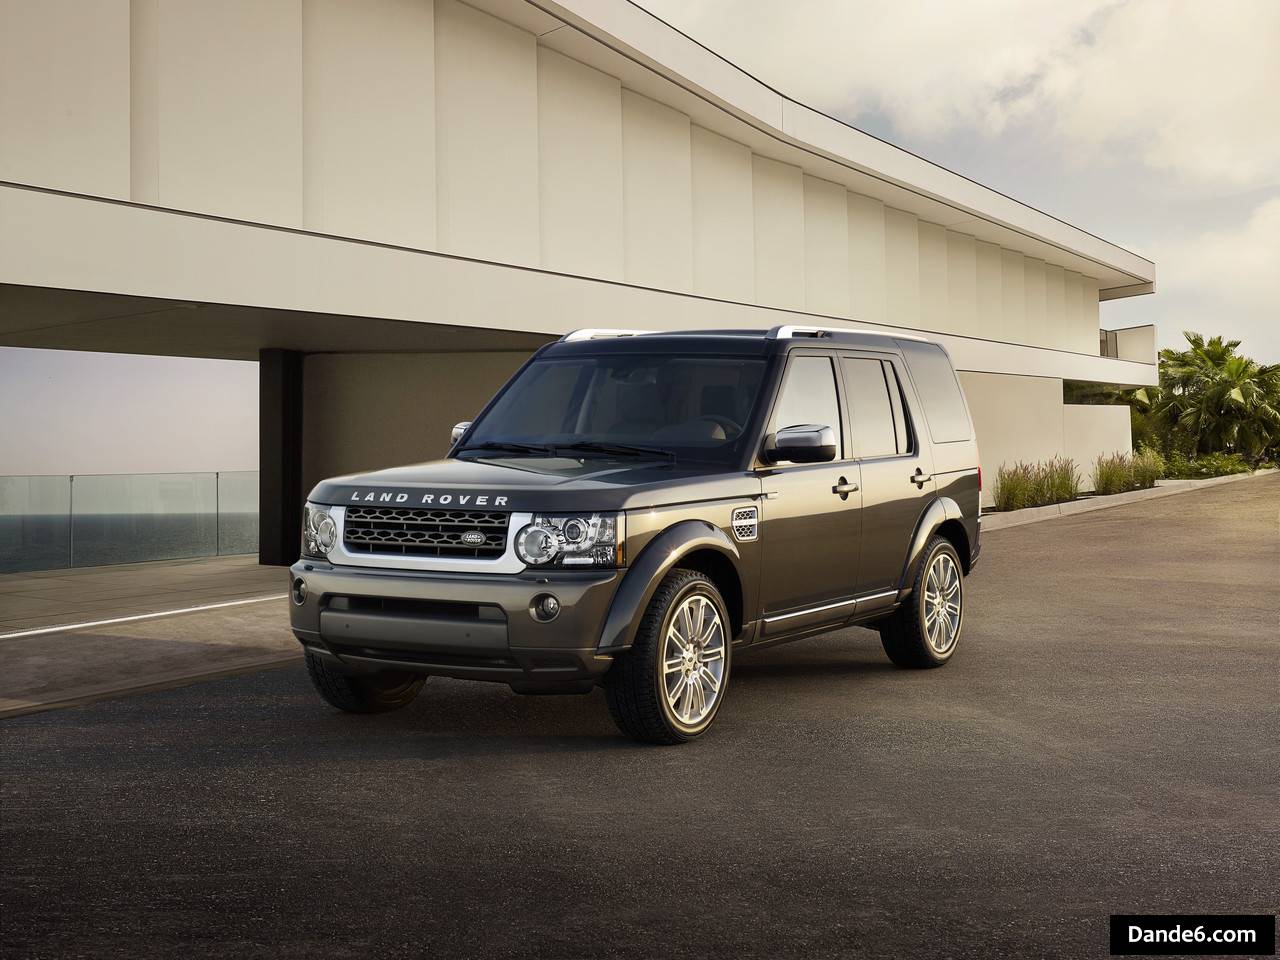 2013 Land Rover Discovery 4 HSE Luxury Limited Edition